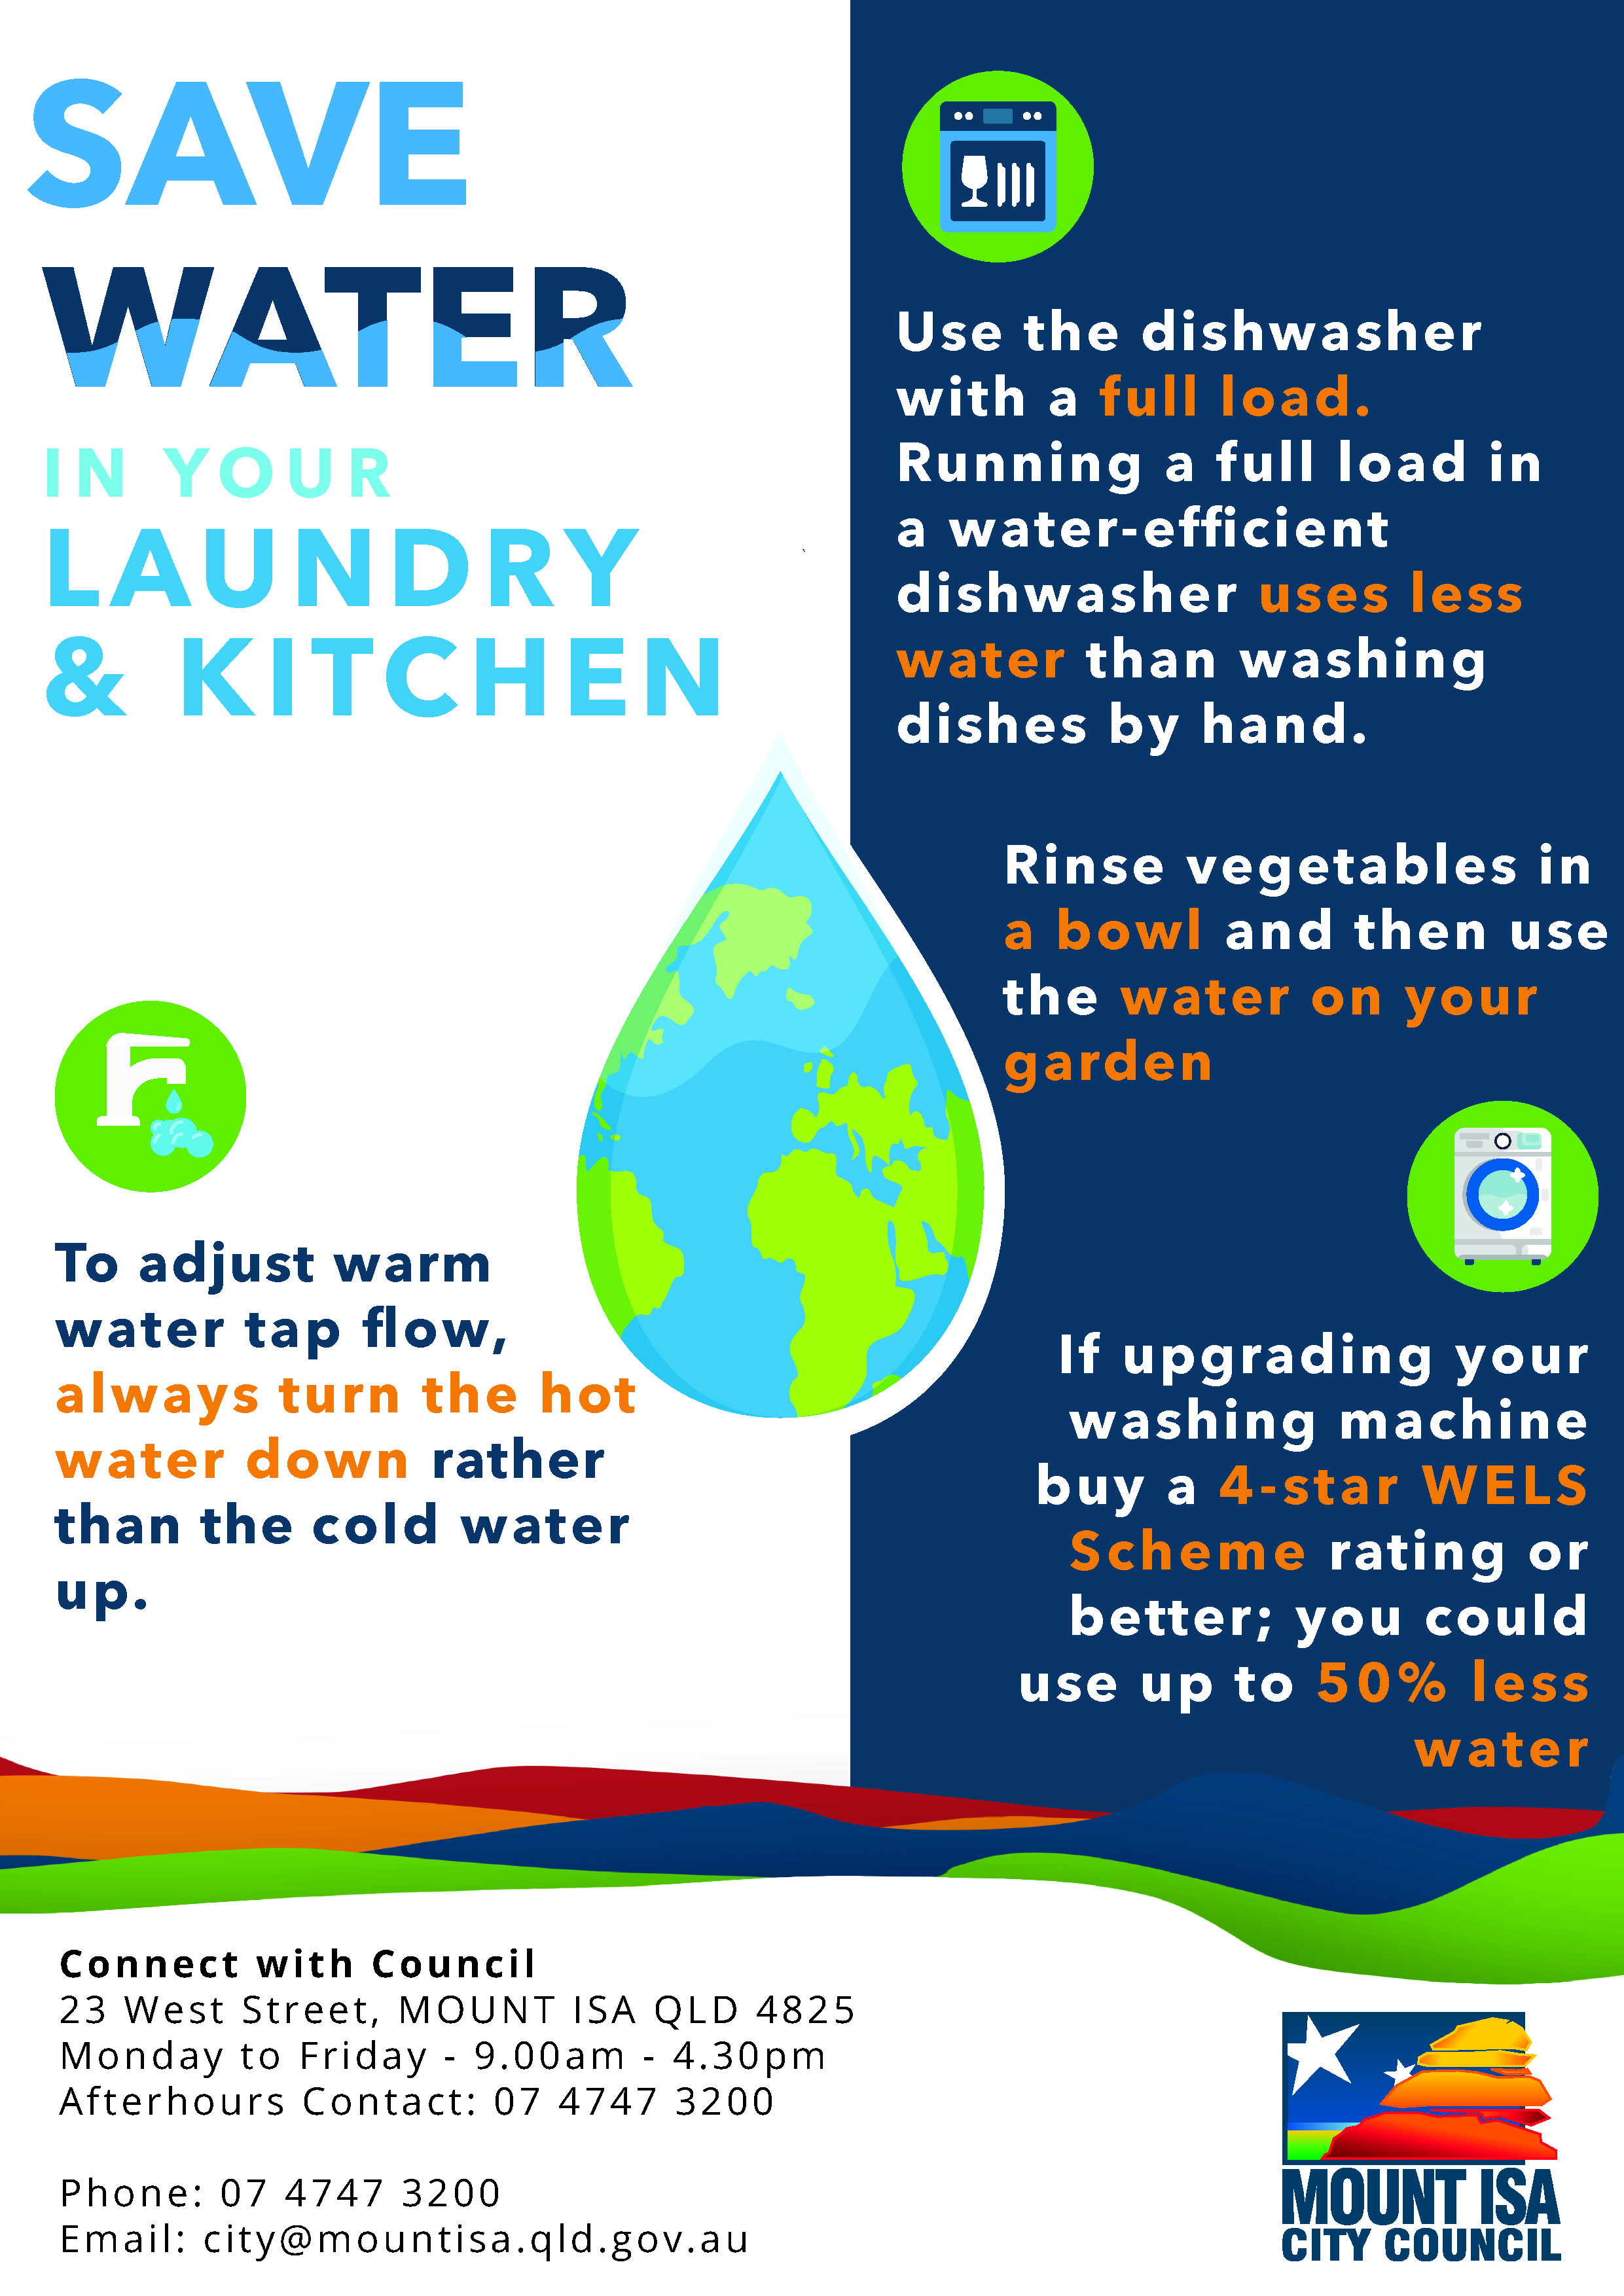 Save Water in Laundry and Kitchen